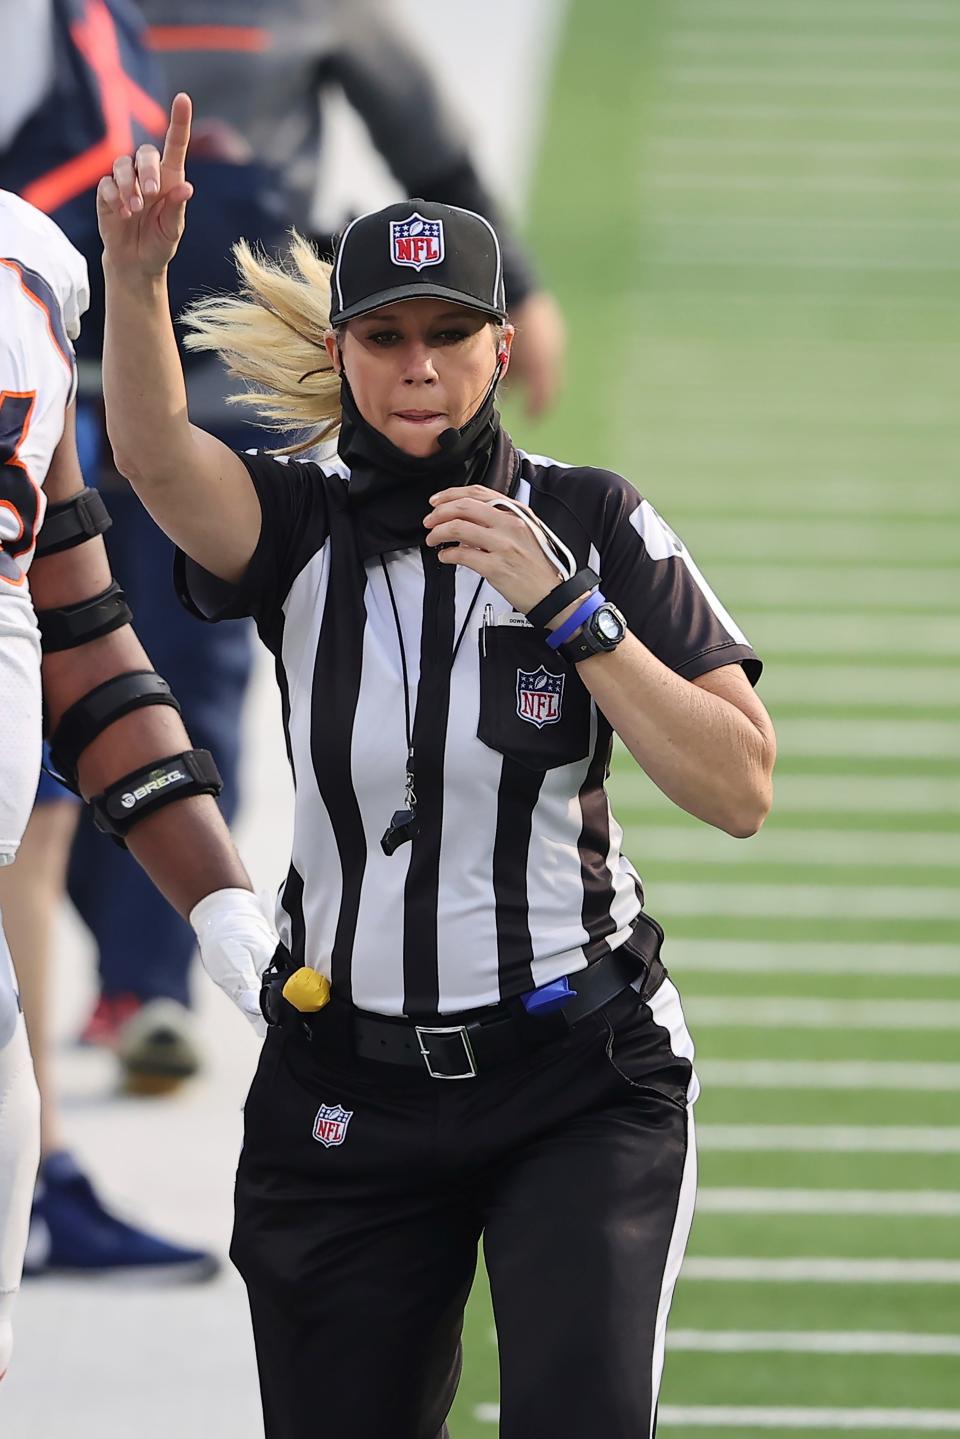 Line judge Sarah Thomas officiates a 2020 NFL game between the Denver Broncos and the Los Angeles Chargers Thomas became the first woman to officiate the Super Bowl in NFL history.